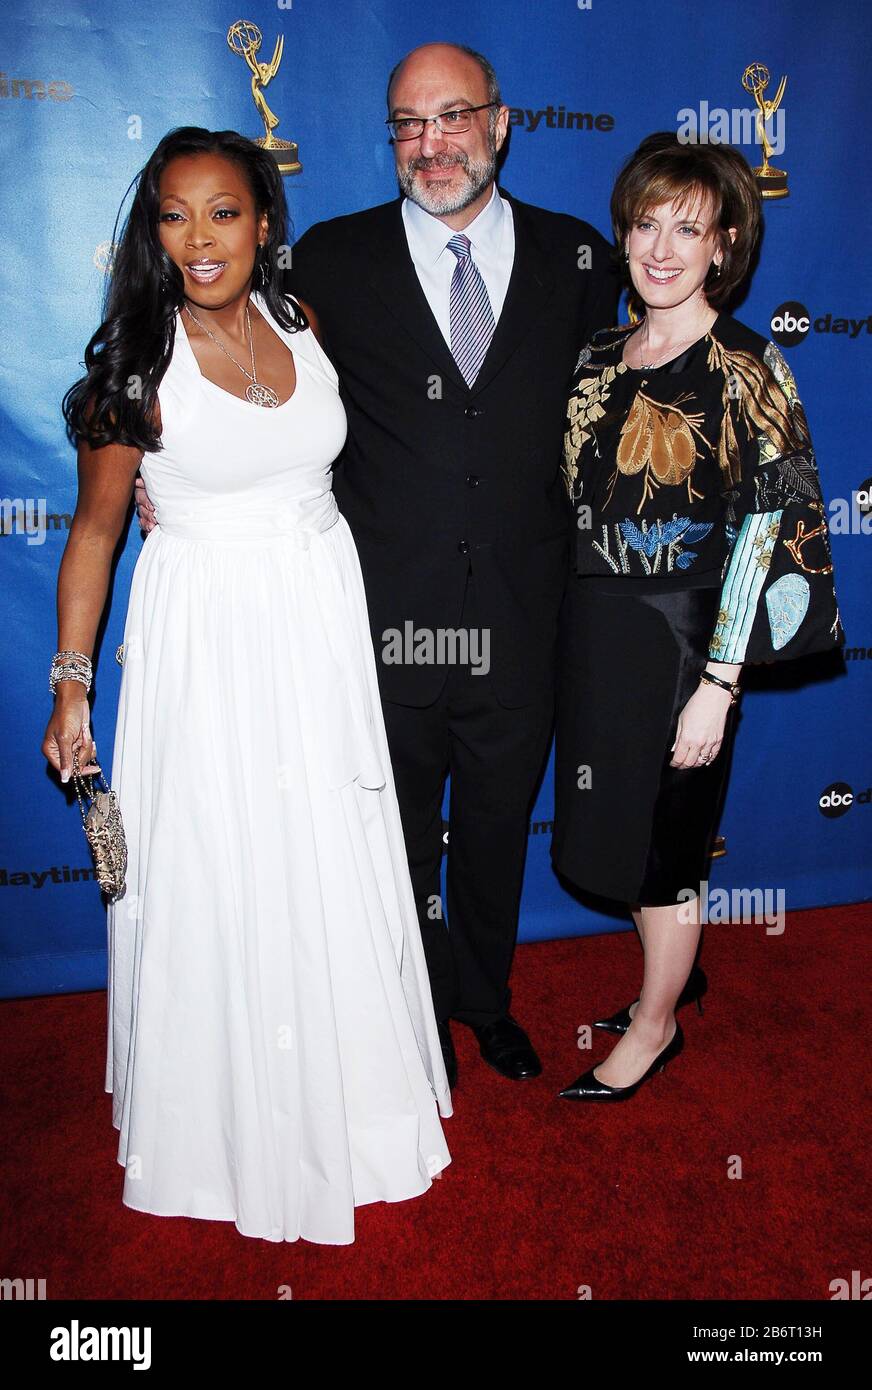 Star Jones Reynolds, President of ABC Daytime Brian Frons and Anne Sweeney at the ABC Daytime Emmy Nominees Dinner held at Spago in Beverly Hills, CA. The event took place on Friday, March 31, 2006.  Photo by: SBM / PictureLux - All Rights Reserved  -  File Reference # 33984-2071SBMPLX Stock Photo